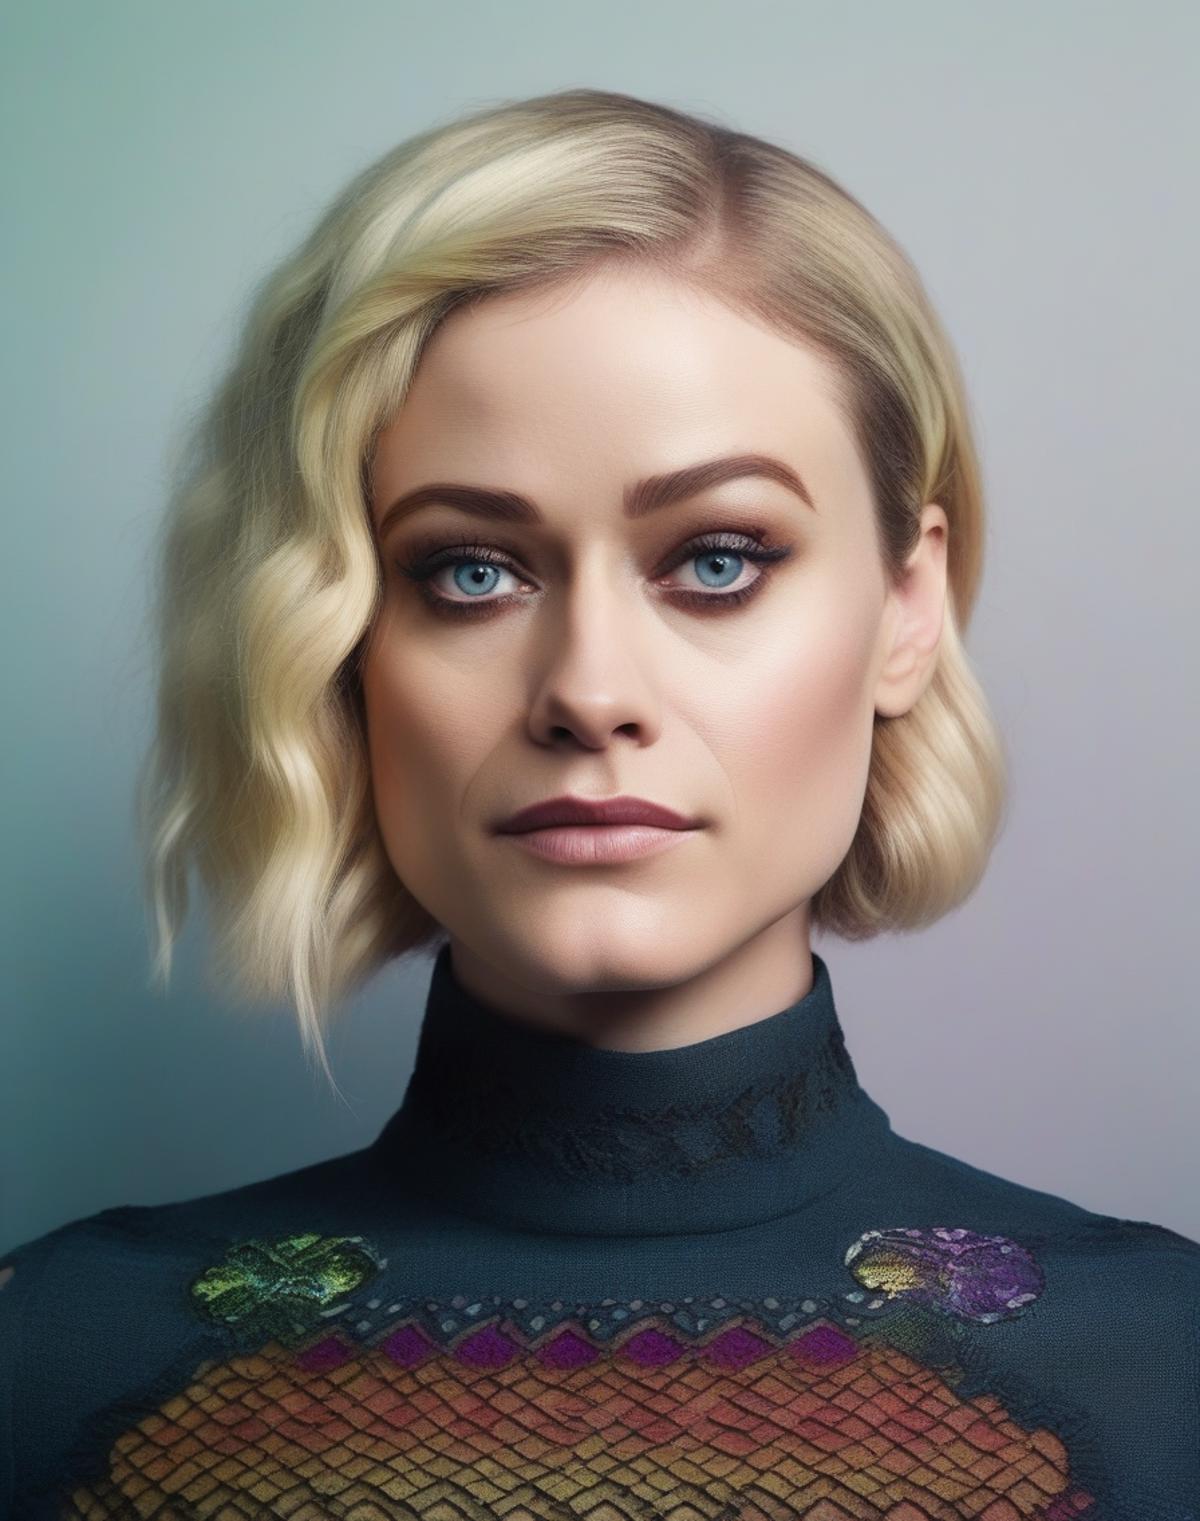 Olivia Taylor Dudley image by parar20